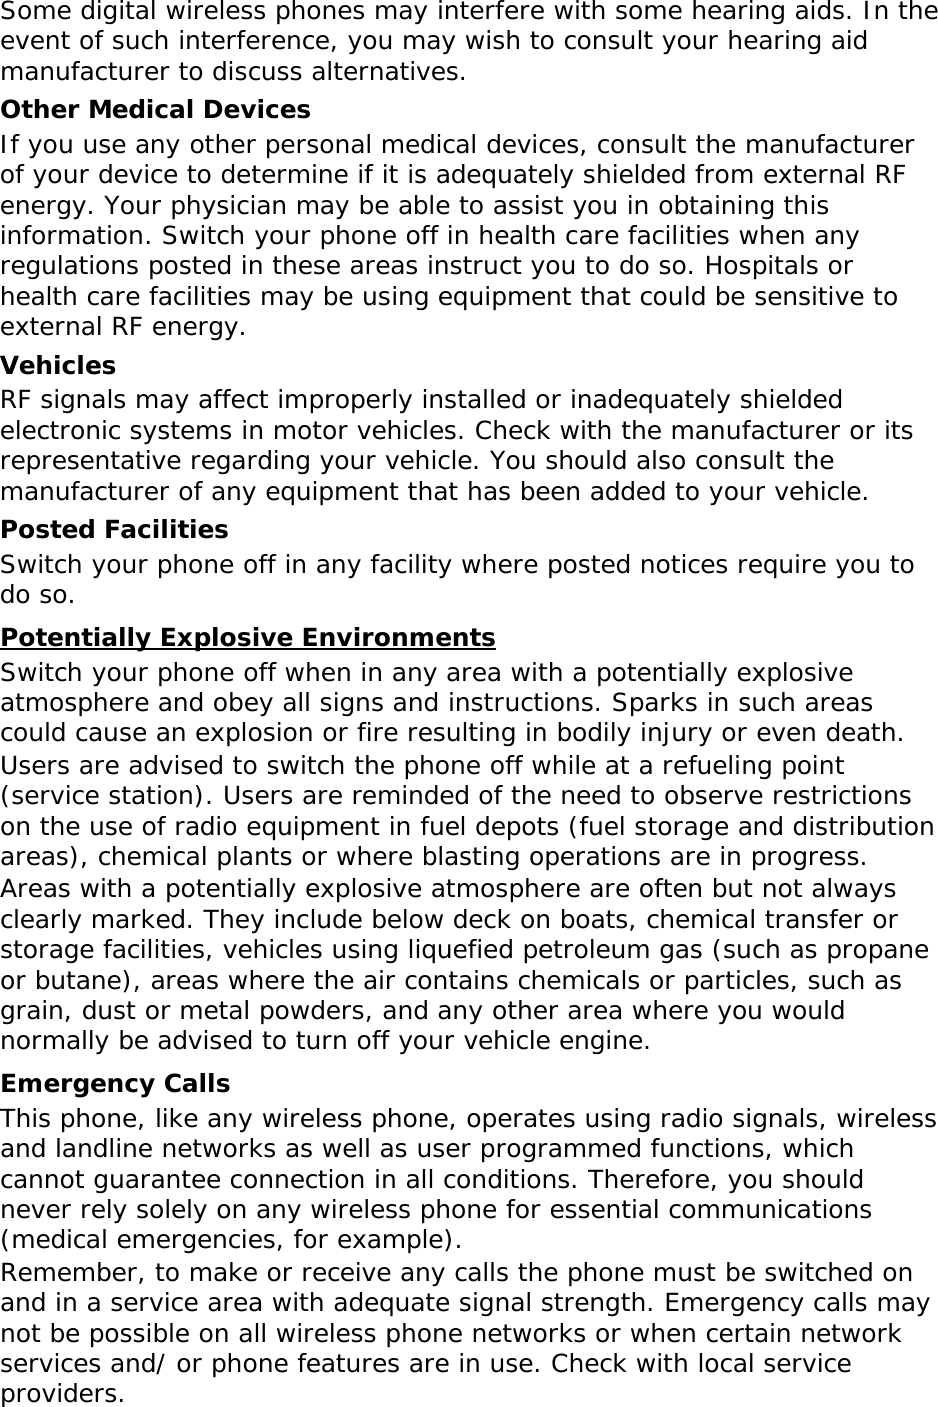 Some digital wireless phones may interfere with some hearing aids. In the event of such interference, you may wish to consult your hearing aid manufacturer to discuss alternatives. Other Medical Devices If you use any other personal medical devices, consult the manufacturer of your device to determine if it is adequately shielded from external RF energy. Your physician may be able to assist you in obtaining this information. Switch your phone off in health care facilities when any regulations posted in these areas instruct you to do so. Hospitals or health care facilities may be using equipment that could be sensitive to external RF energy. Vehicles RF signals may affect improperly installed or inadequately shielded electronic systems in motor vehicles. Check with the manufacturer or its representative regarding your vehicle. You should also consult the manufacturer of any equipment that has been added to your vehicle. Posted Facilities Switch your phone off in any facility where posted notices require you to do so. Potentially Explosive Environments Switch your phone off when in any area with a potentially explosive atmosphere and obey all signs and instructions. Sparks in such areas could cause an explosion or fire resulting in bodily injury or even death. Users are advised to switch the phone off while at a refueling point (service station). Users are reminded of the need to observe restrictions on the use of radio equipment in fuel depots (fuel storage and distribution areas), chemical plants or where blasting operations are in progress. Areas with a potentially explosive atmosphere are often but not always clearly marked. They include below deck on boats, chemical transfer or storage facilities, vehicles using liquefied petroleum gas (such as propane or butane), areas where the air contains chemicals or particles, such as grain, dust or metal powders, and any other area where you would normally be advised to turn off your vehicle engine. Emergency Calls This phone, like any wireless phone, operates using radio signals, wireless and landline networks as well as user programmed functions, which cannot guarantee connection in all conditions. Therefore, you should never rely solely on any wireless phone for essential communications (medical emergencies, for example). Remember, to make or receive any calls the phone must be switched on and in a service area with adequate signal strength. Emergency calls may not be possible on all wireless phone networks or when certain network services and/ or phone features are in use. Check with local service providers. 